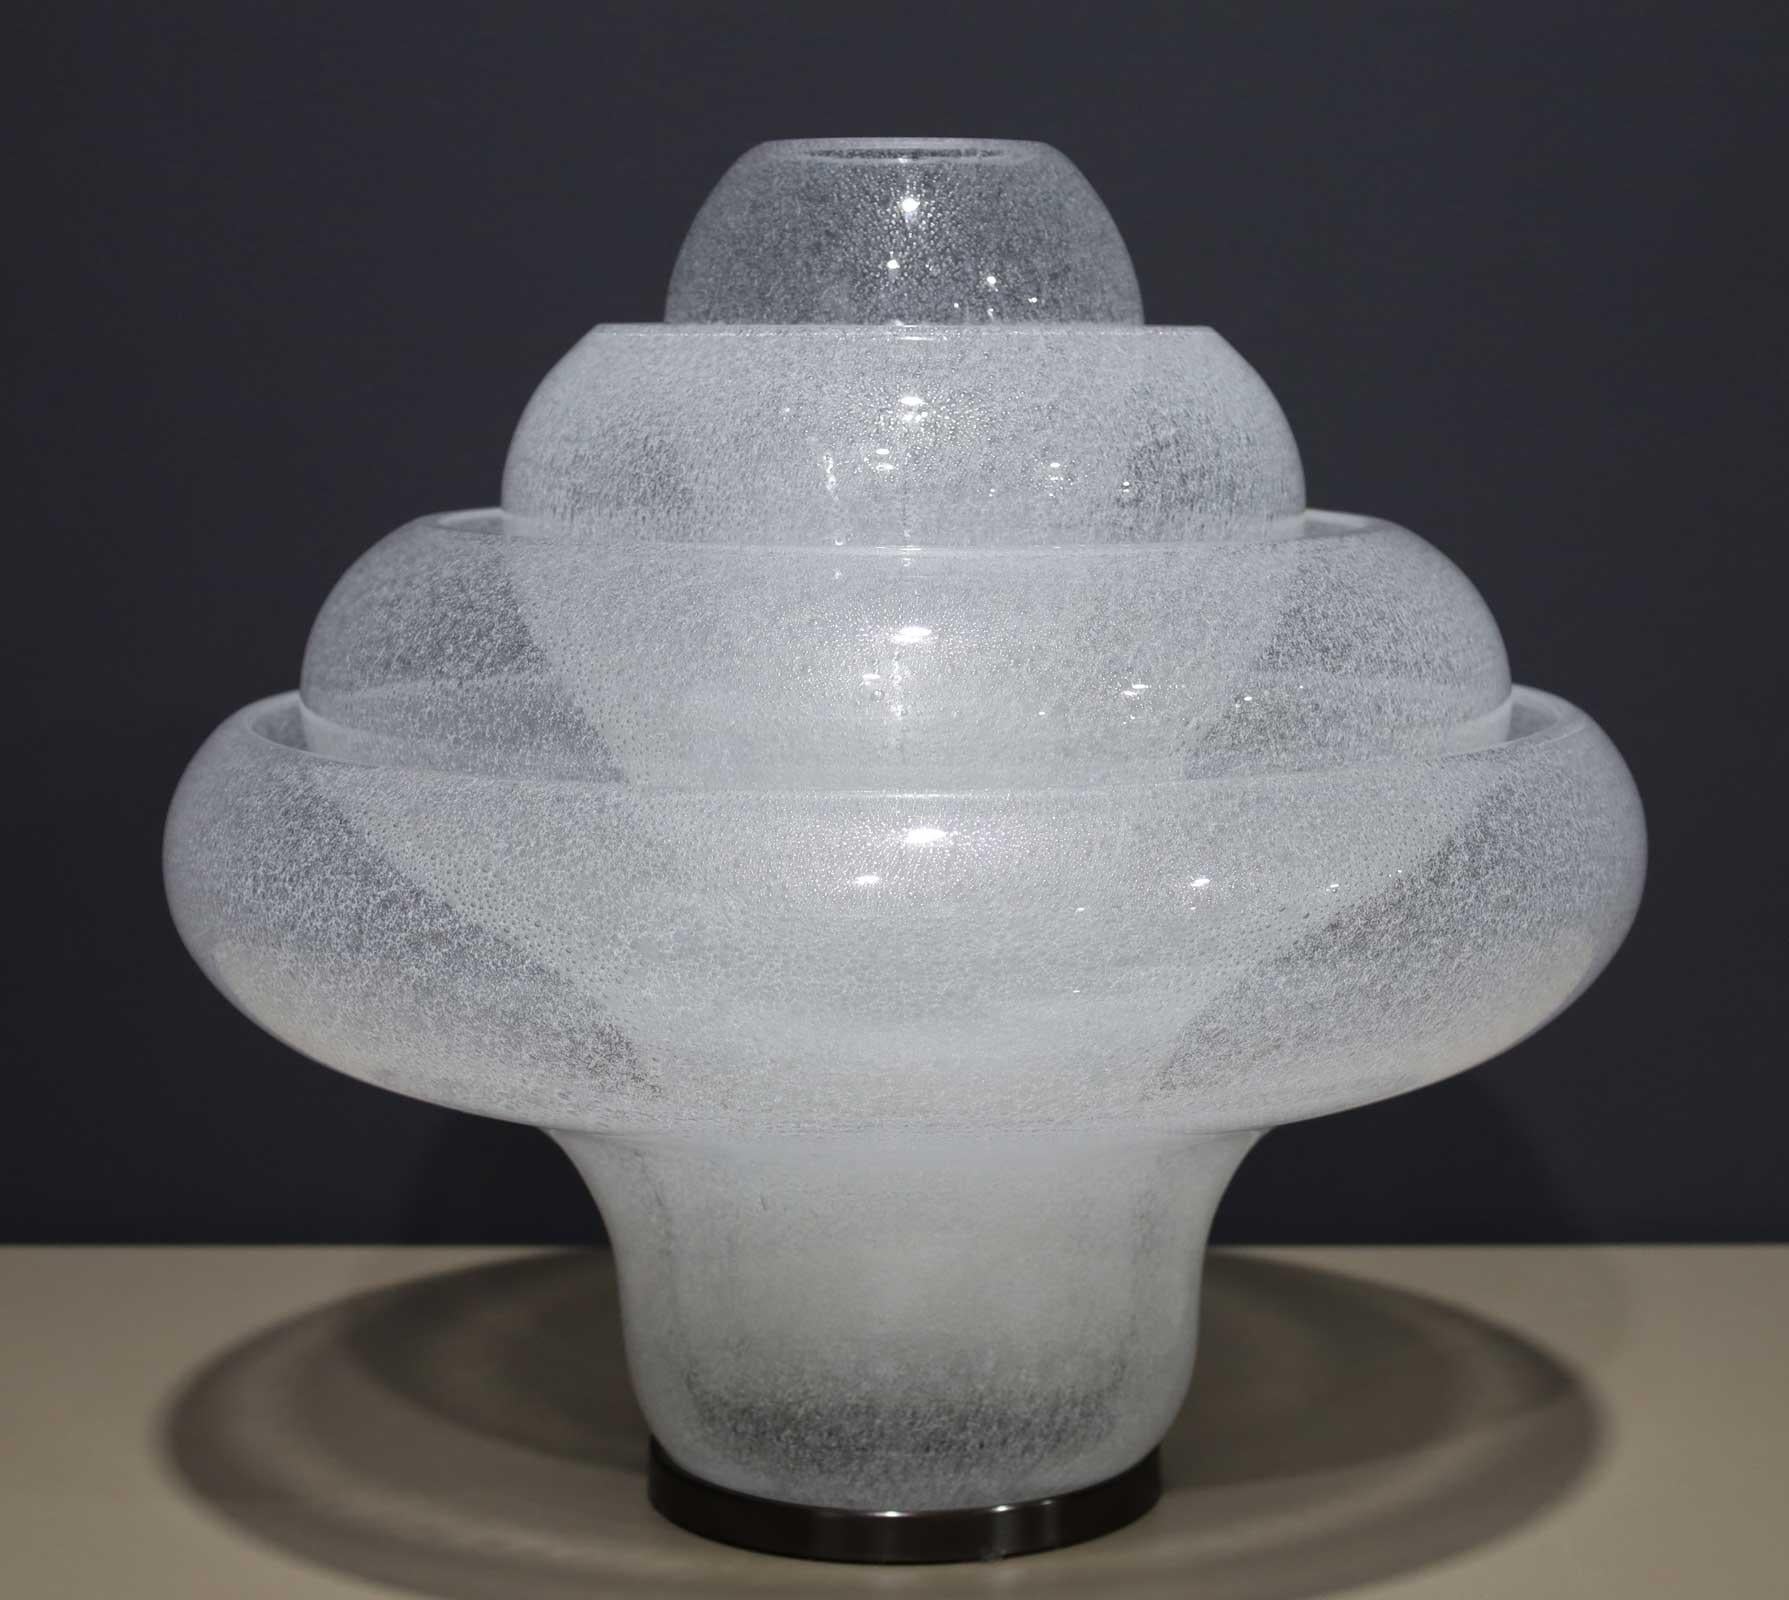 The beautiful lotus lamp by Carlo Nason. Made in Italy with gorgeous murano glass. Lamp has 4 layers, with 3 removable layers that are inserted in the center. A gas type bulb illuminates the lamp.